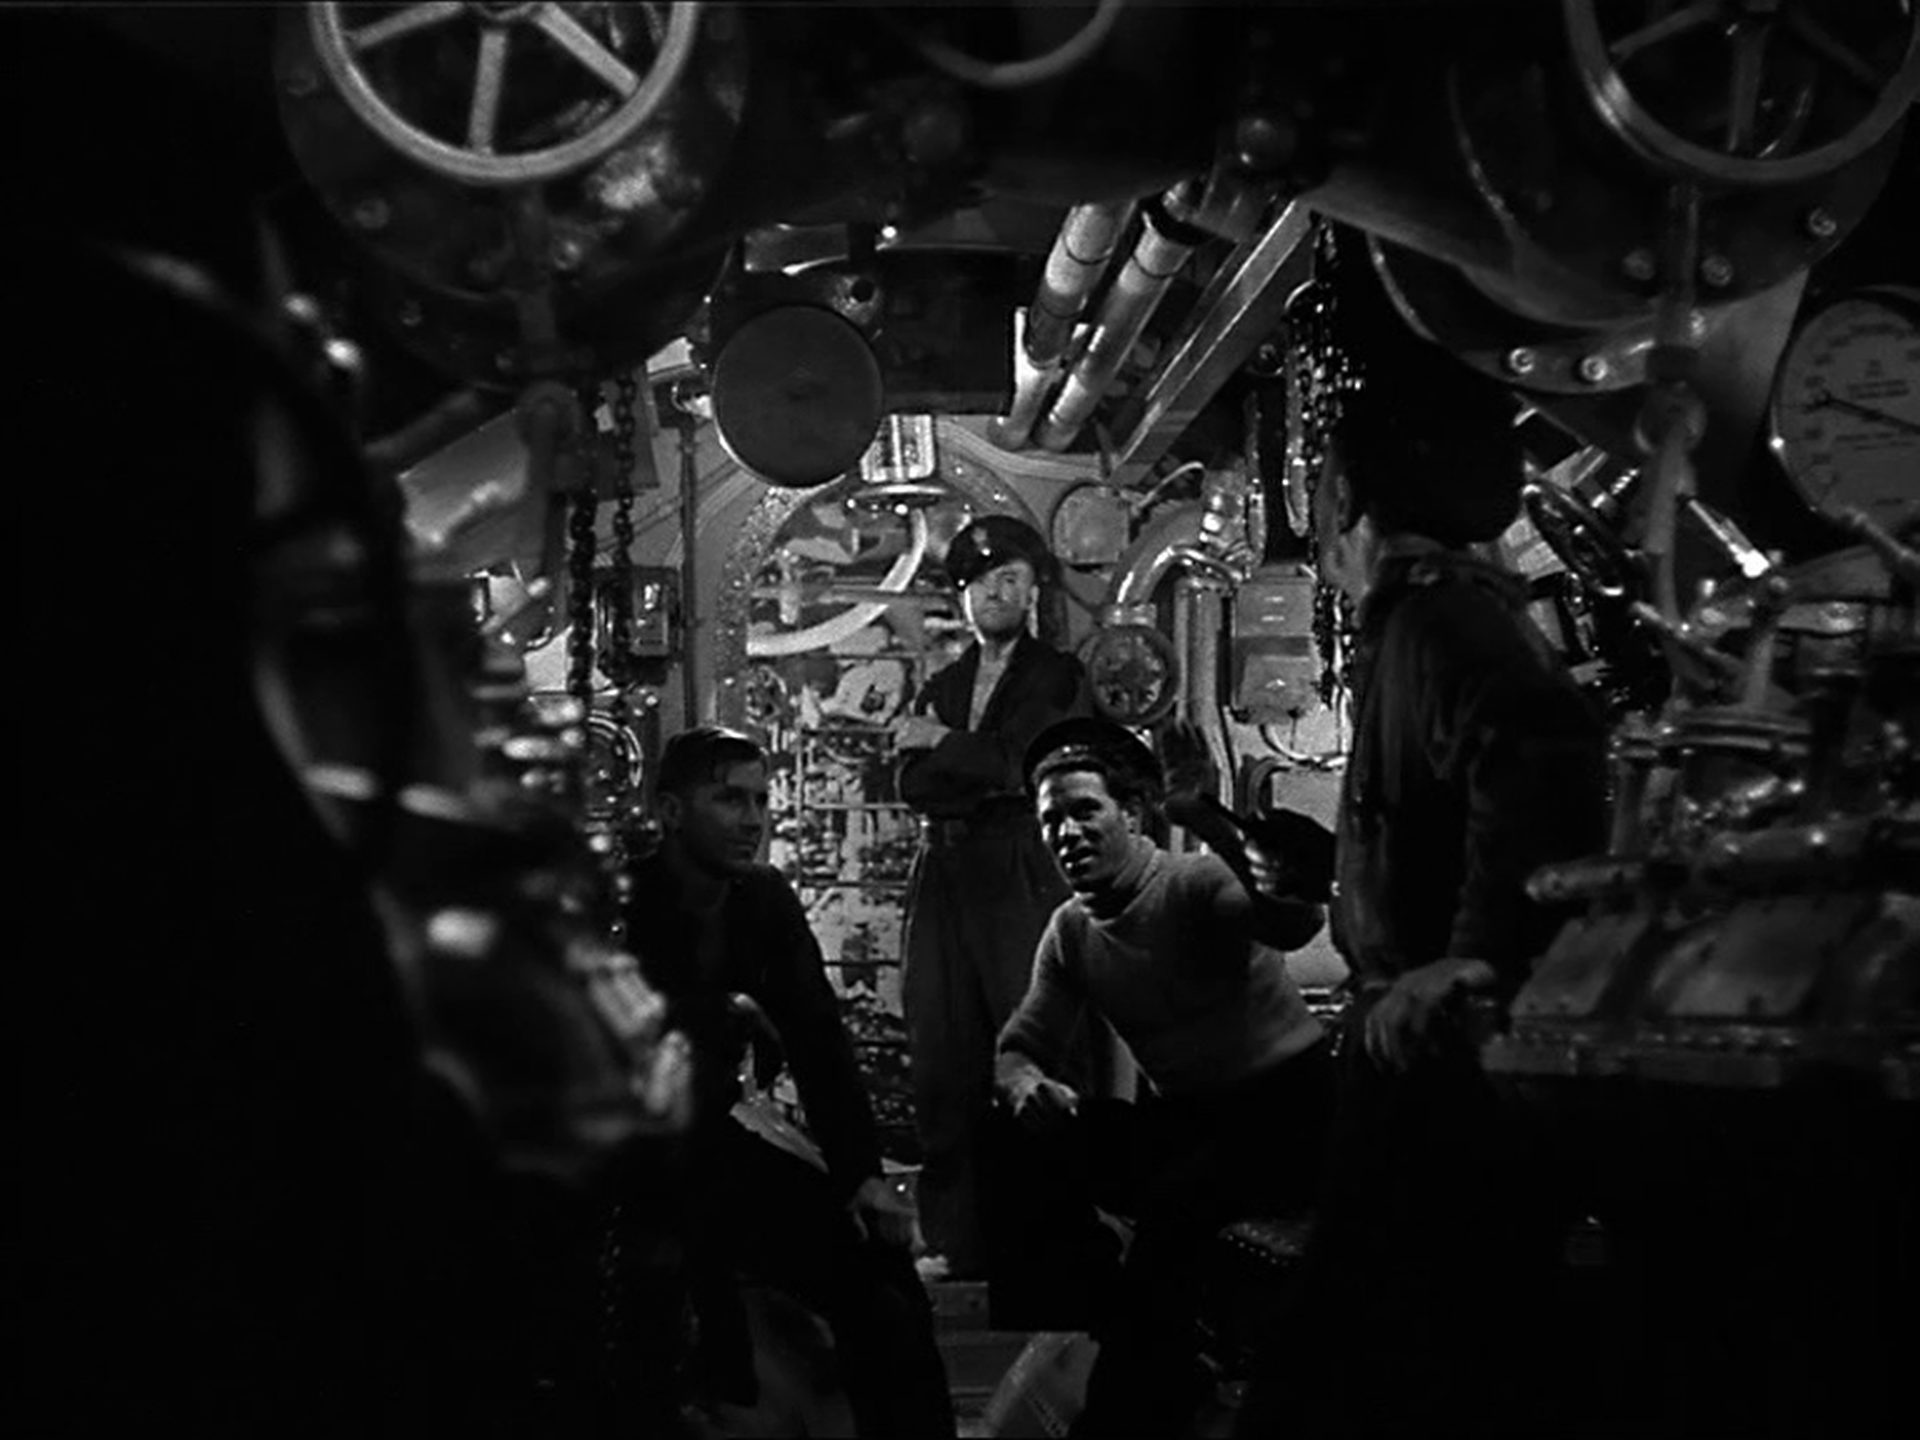 Black and white scene inside British submarine; view of three alert sailors surrounded by complex mechanics.